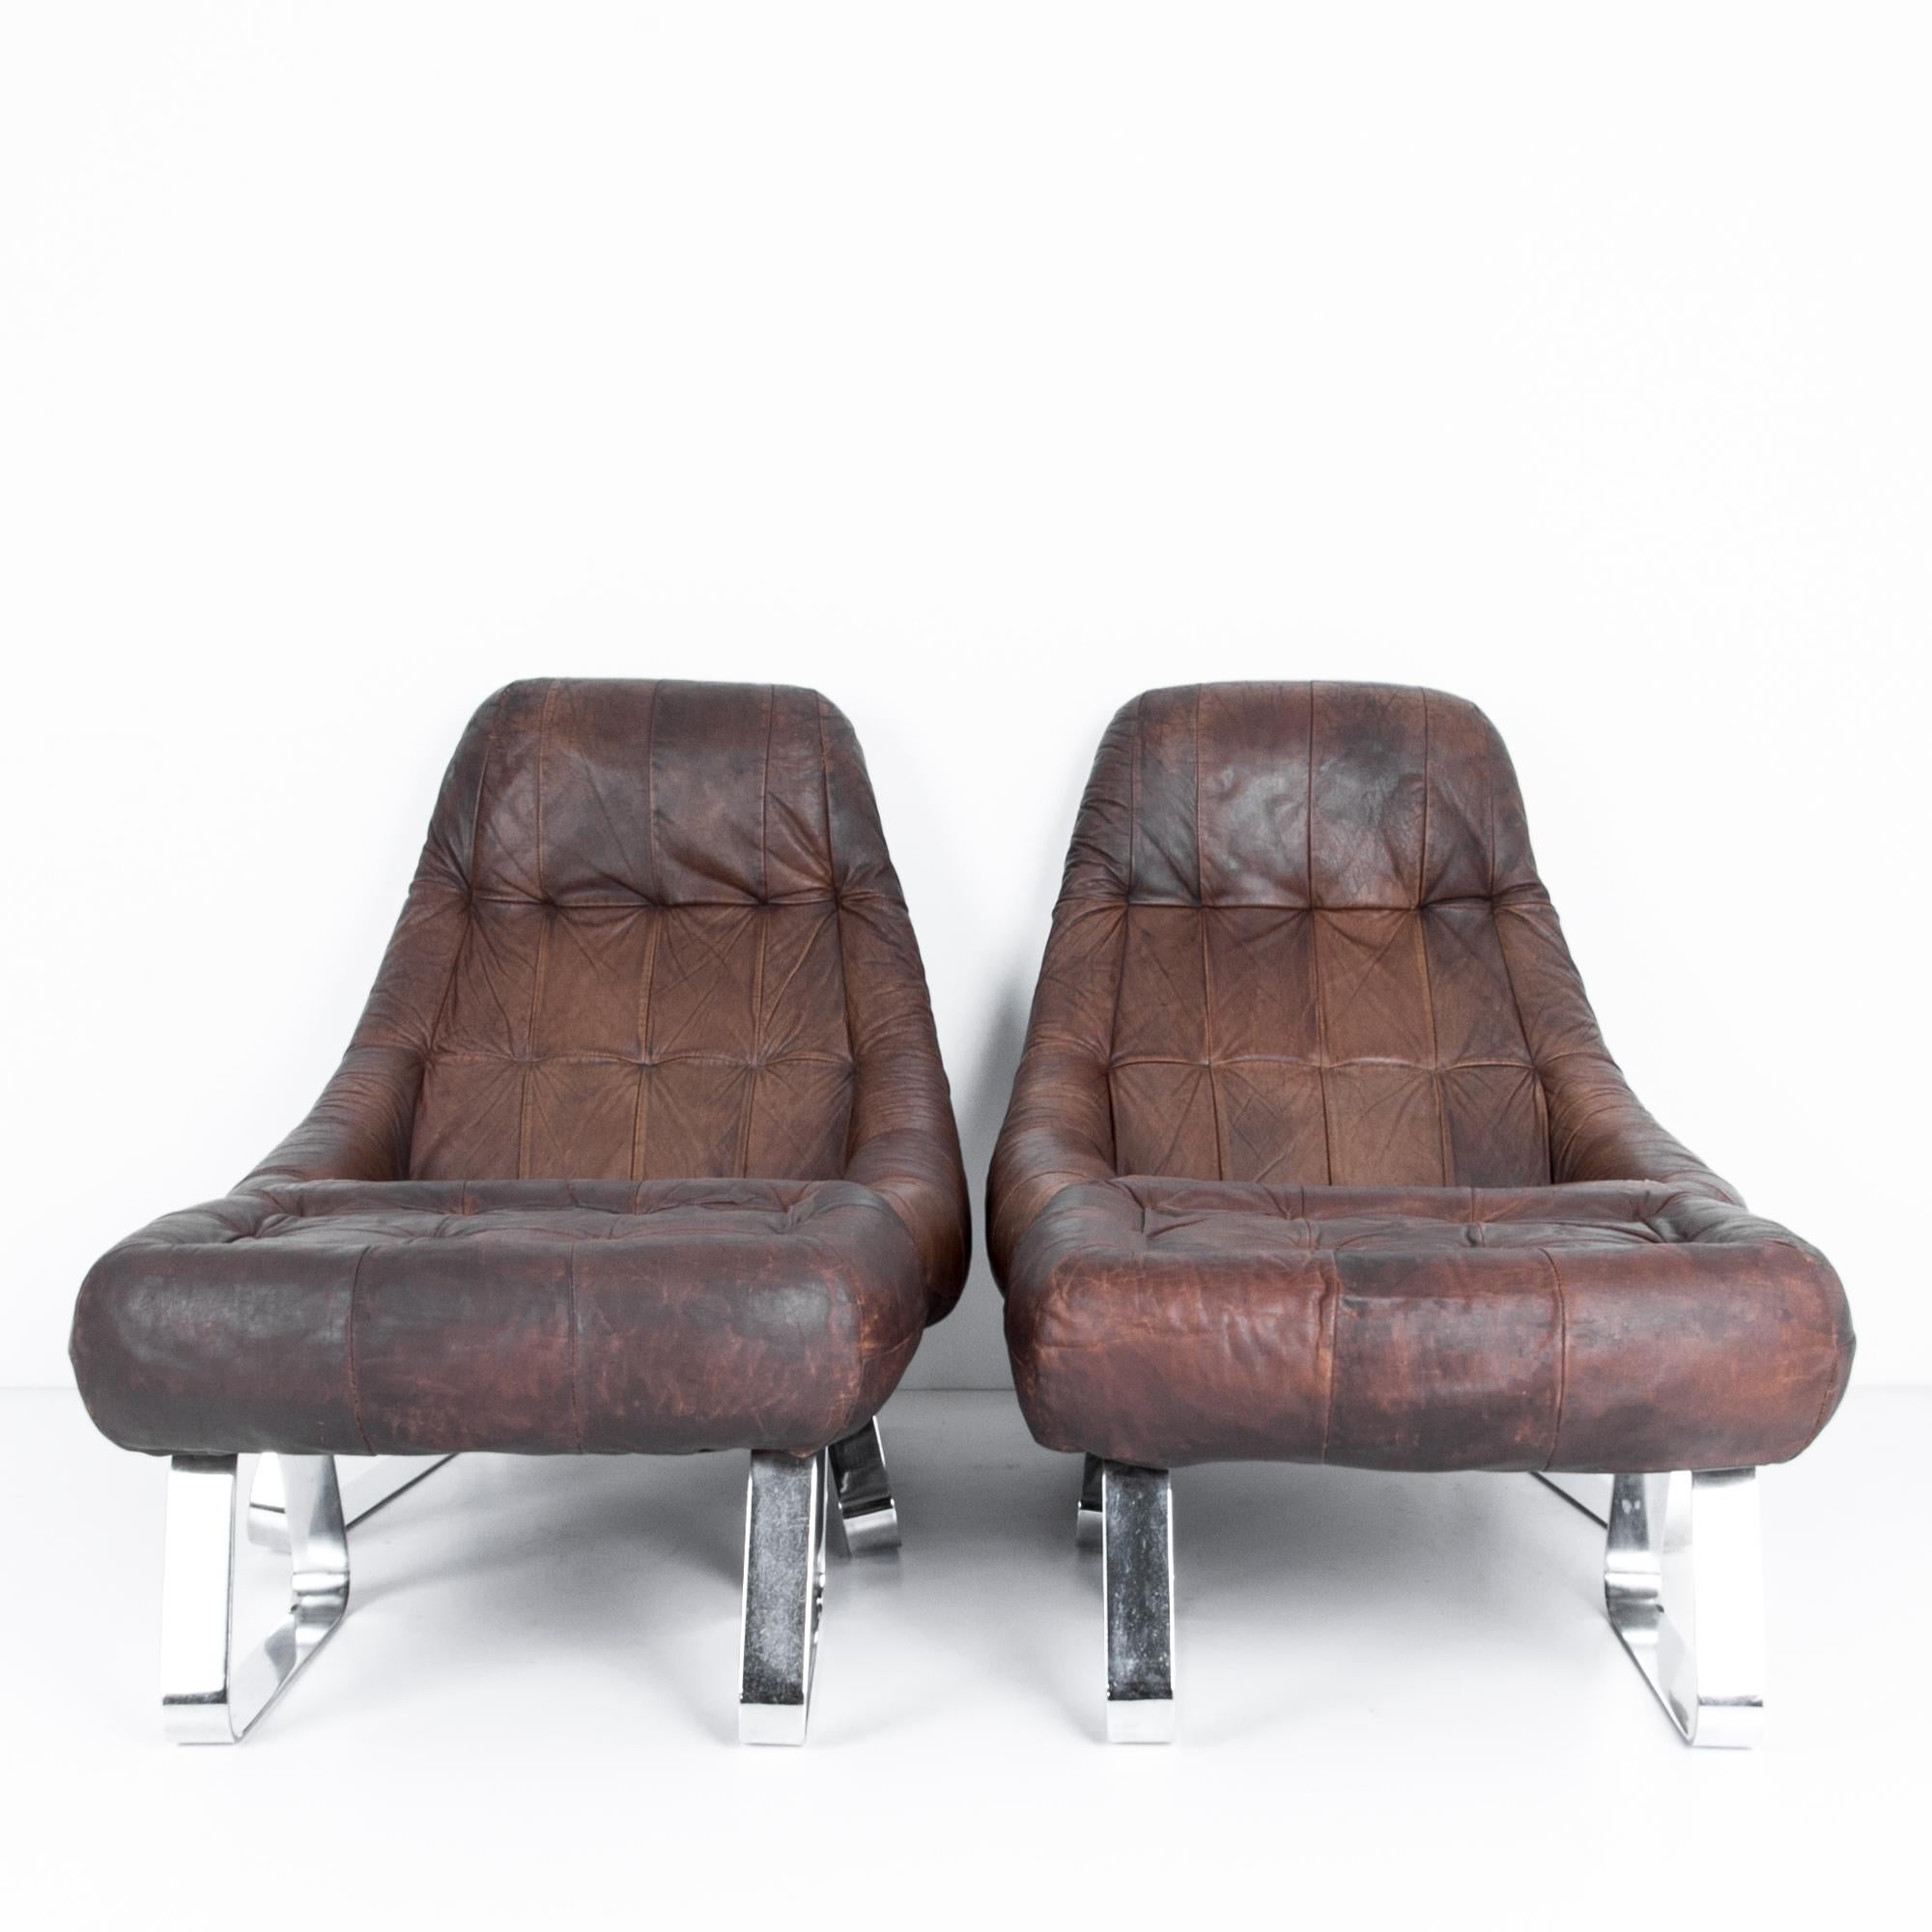 A pair of leather armchairs with matching ottomans by Brazilian designer Percival Lafer. Elegantly aged, the patina highlights a rich dark leather, elevated on chromed metal legs. The effortlessly clever design is captured in en-pointe material,